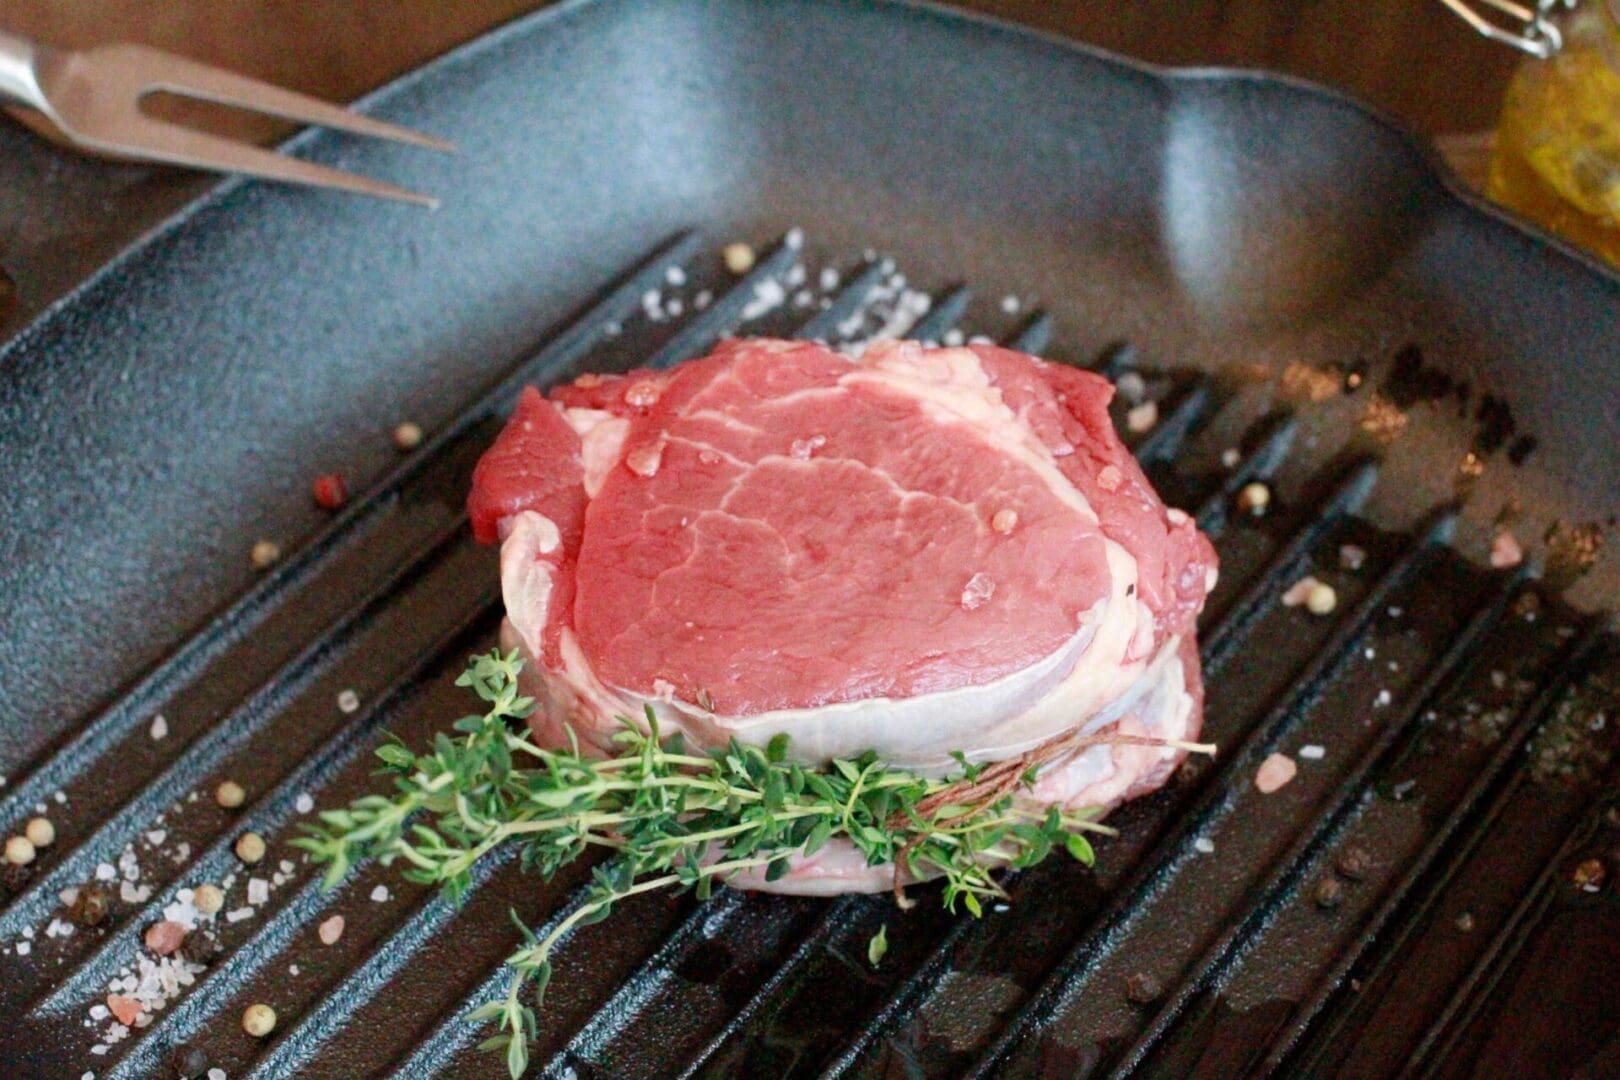 A piece of meat is sitting on the grill.